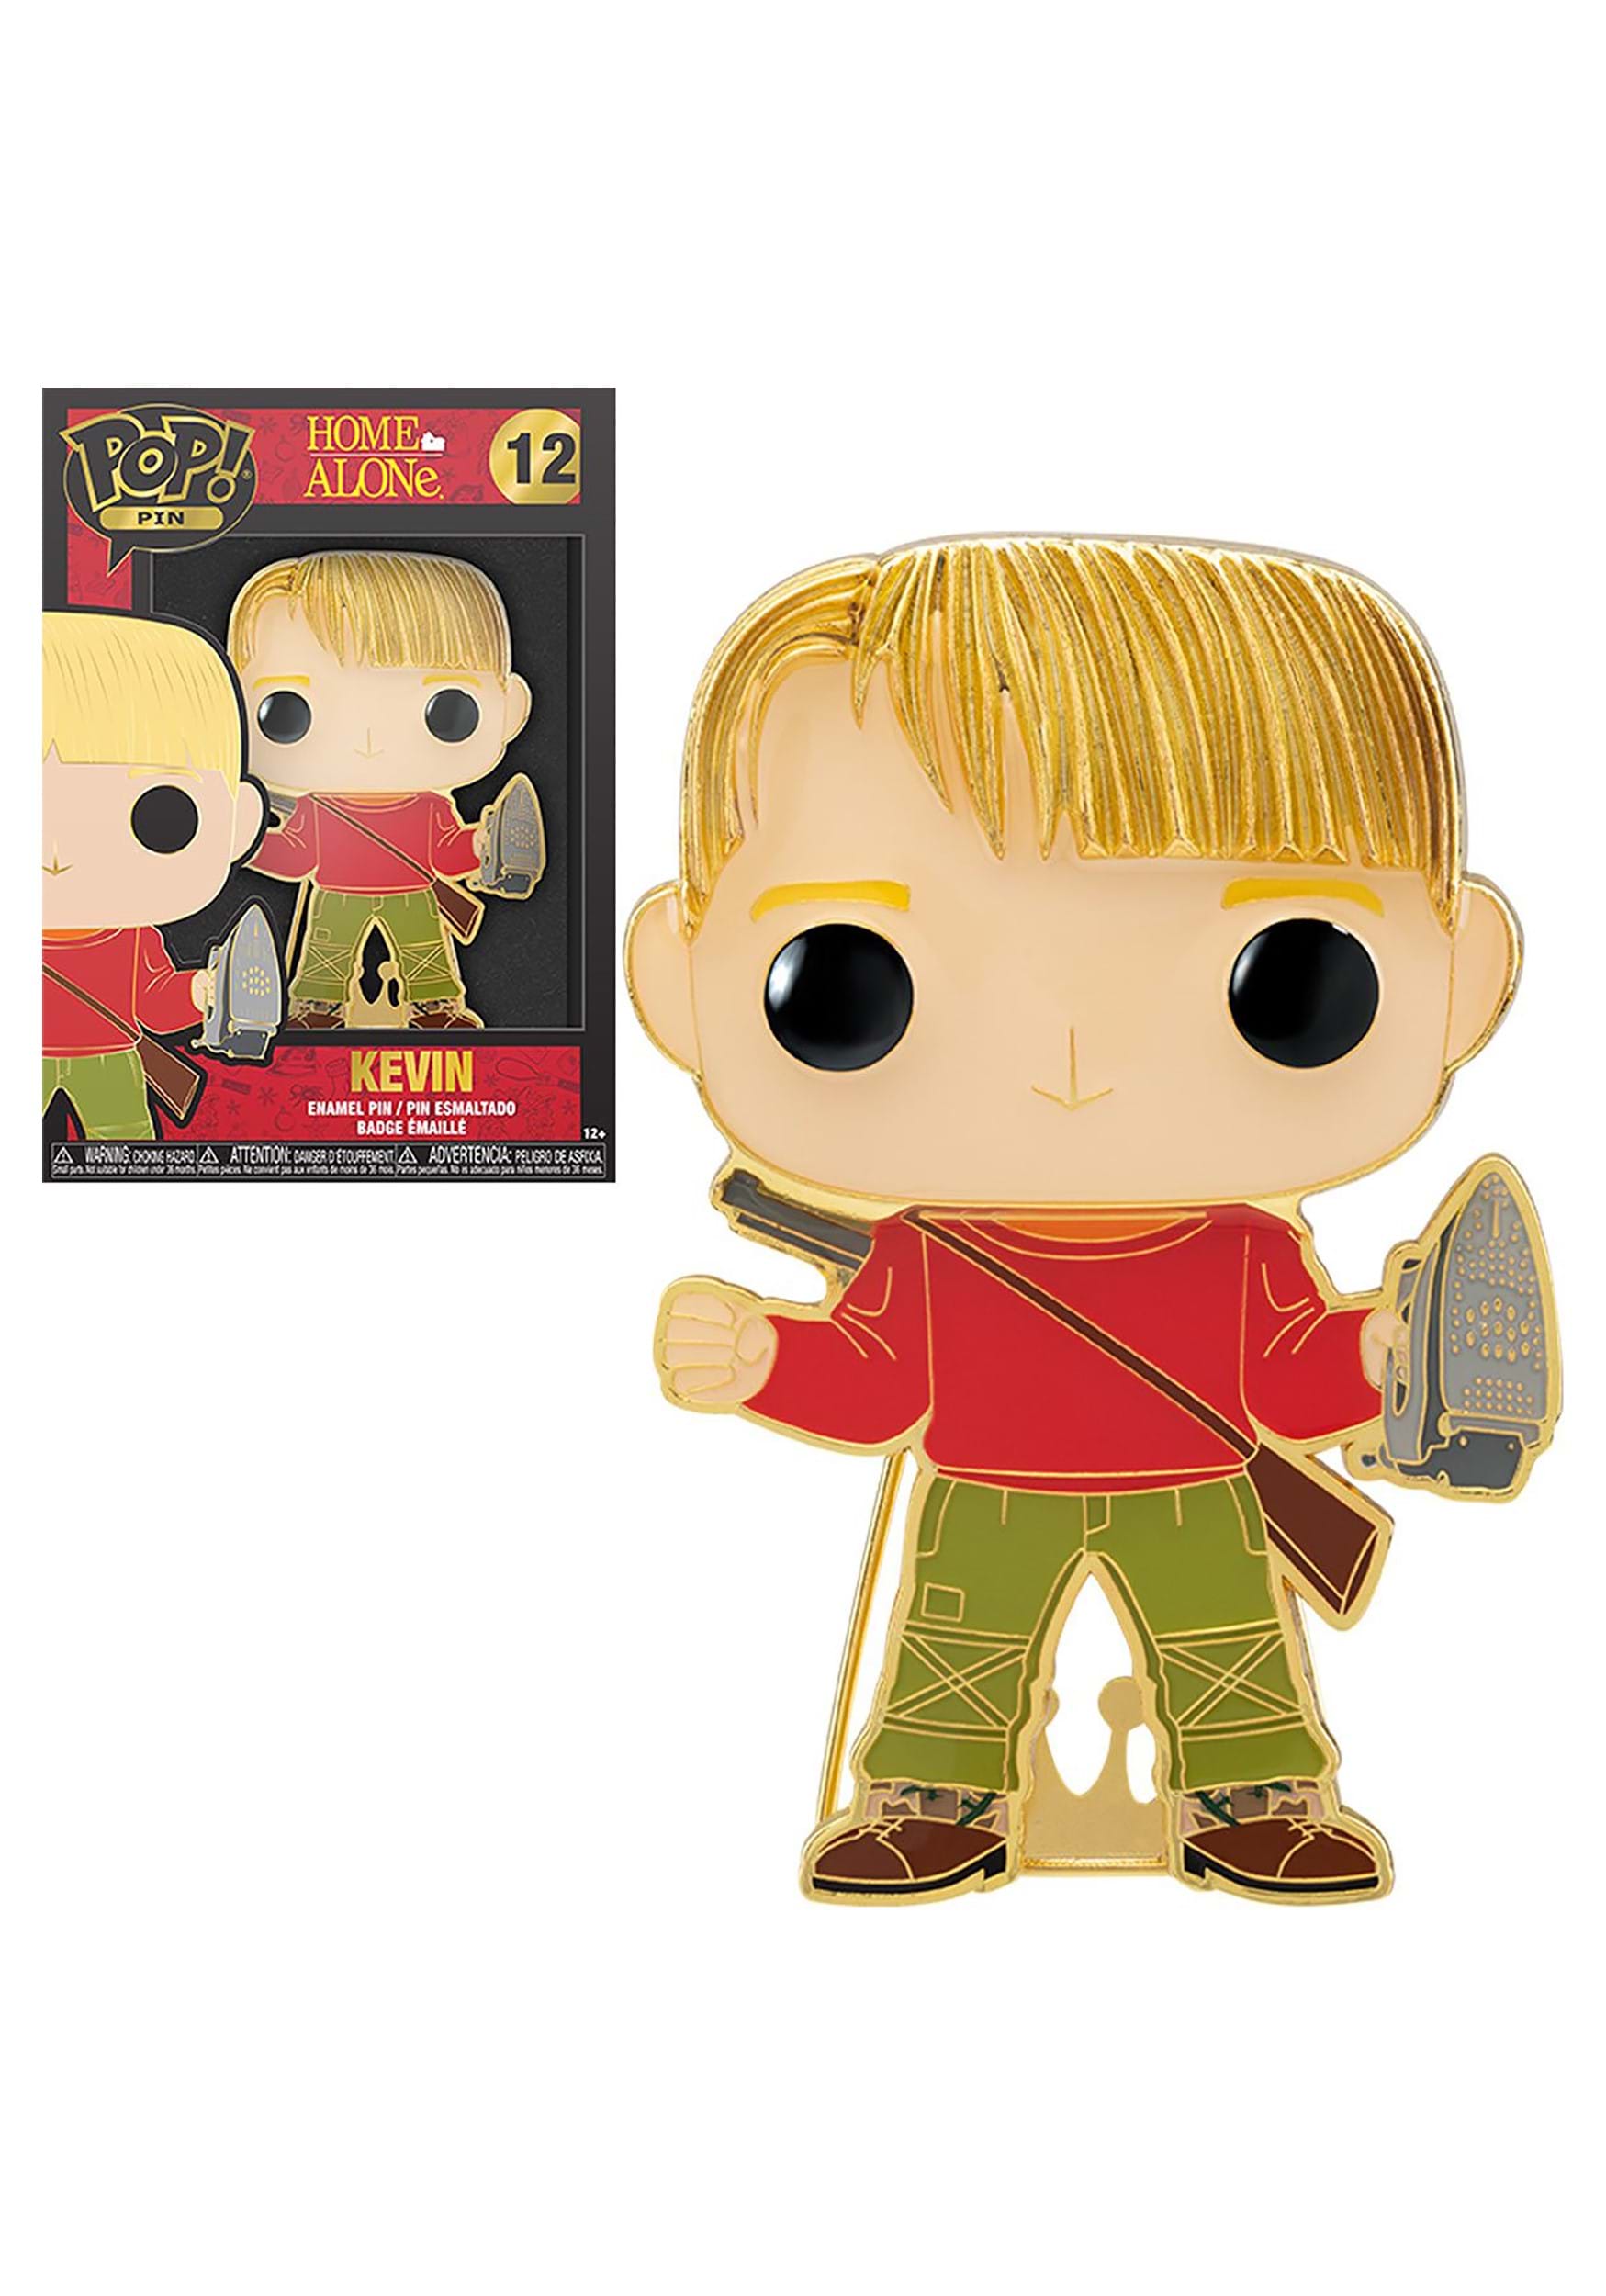 POP Pins: Home Alone: Kevin from Funko